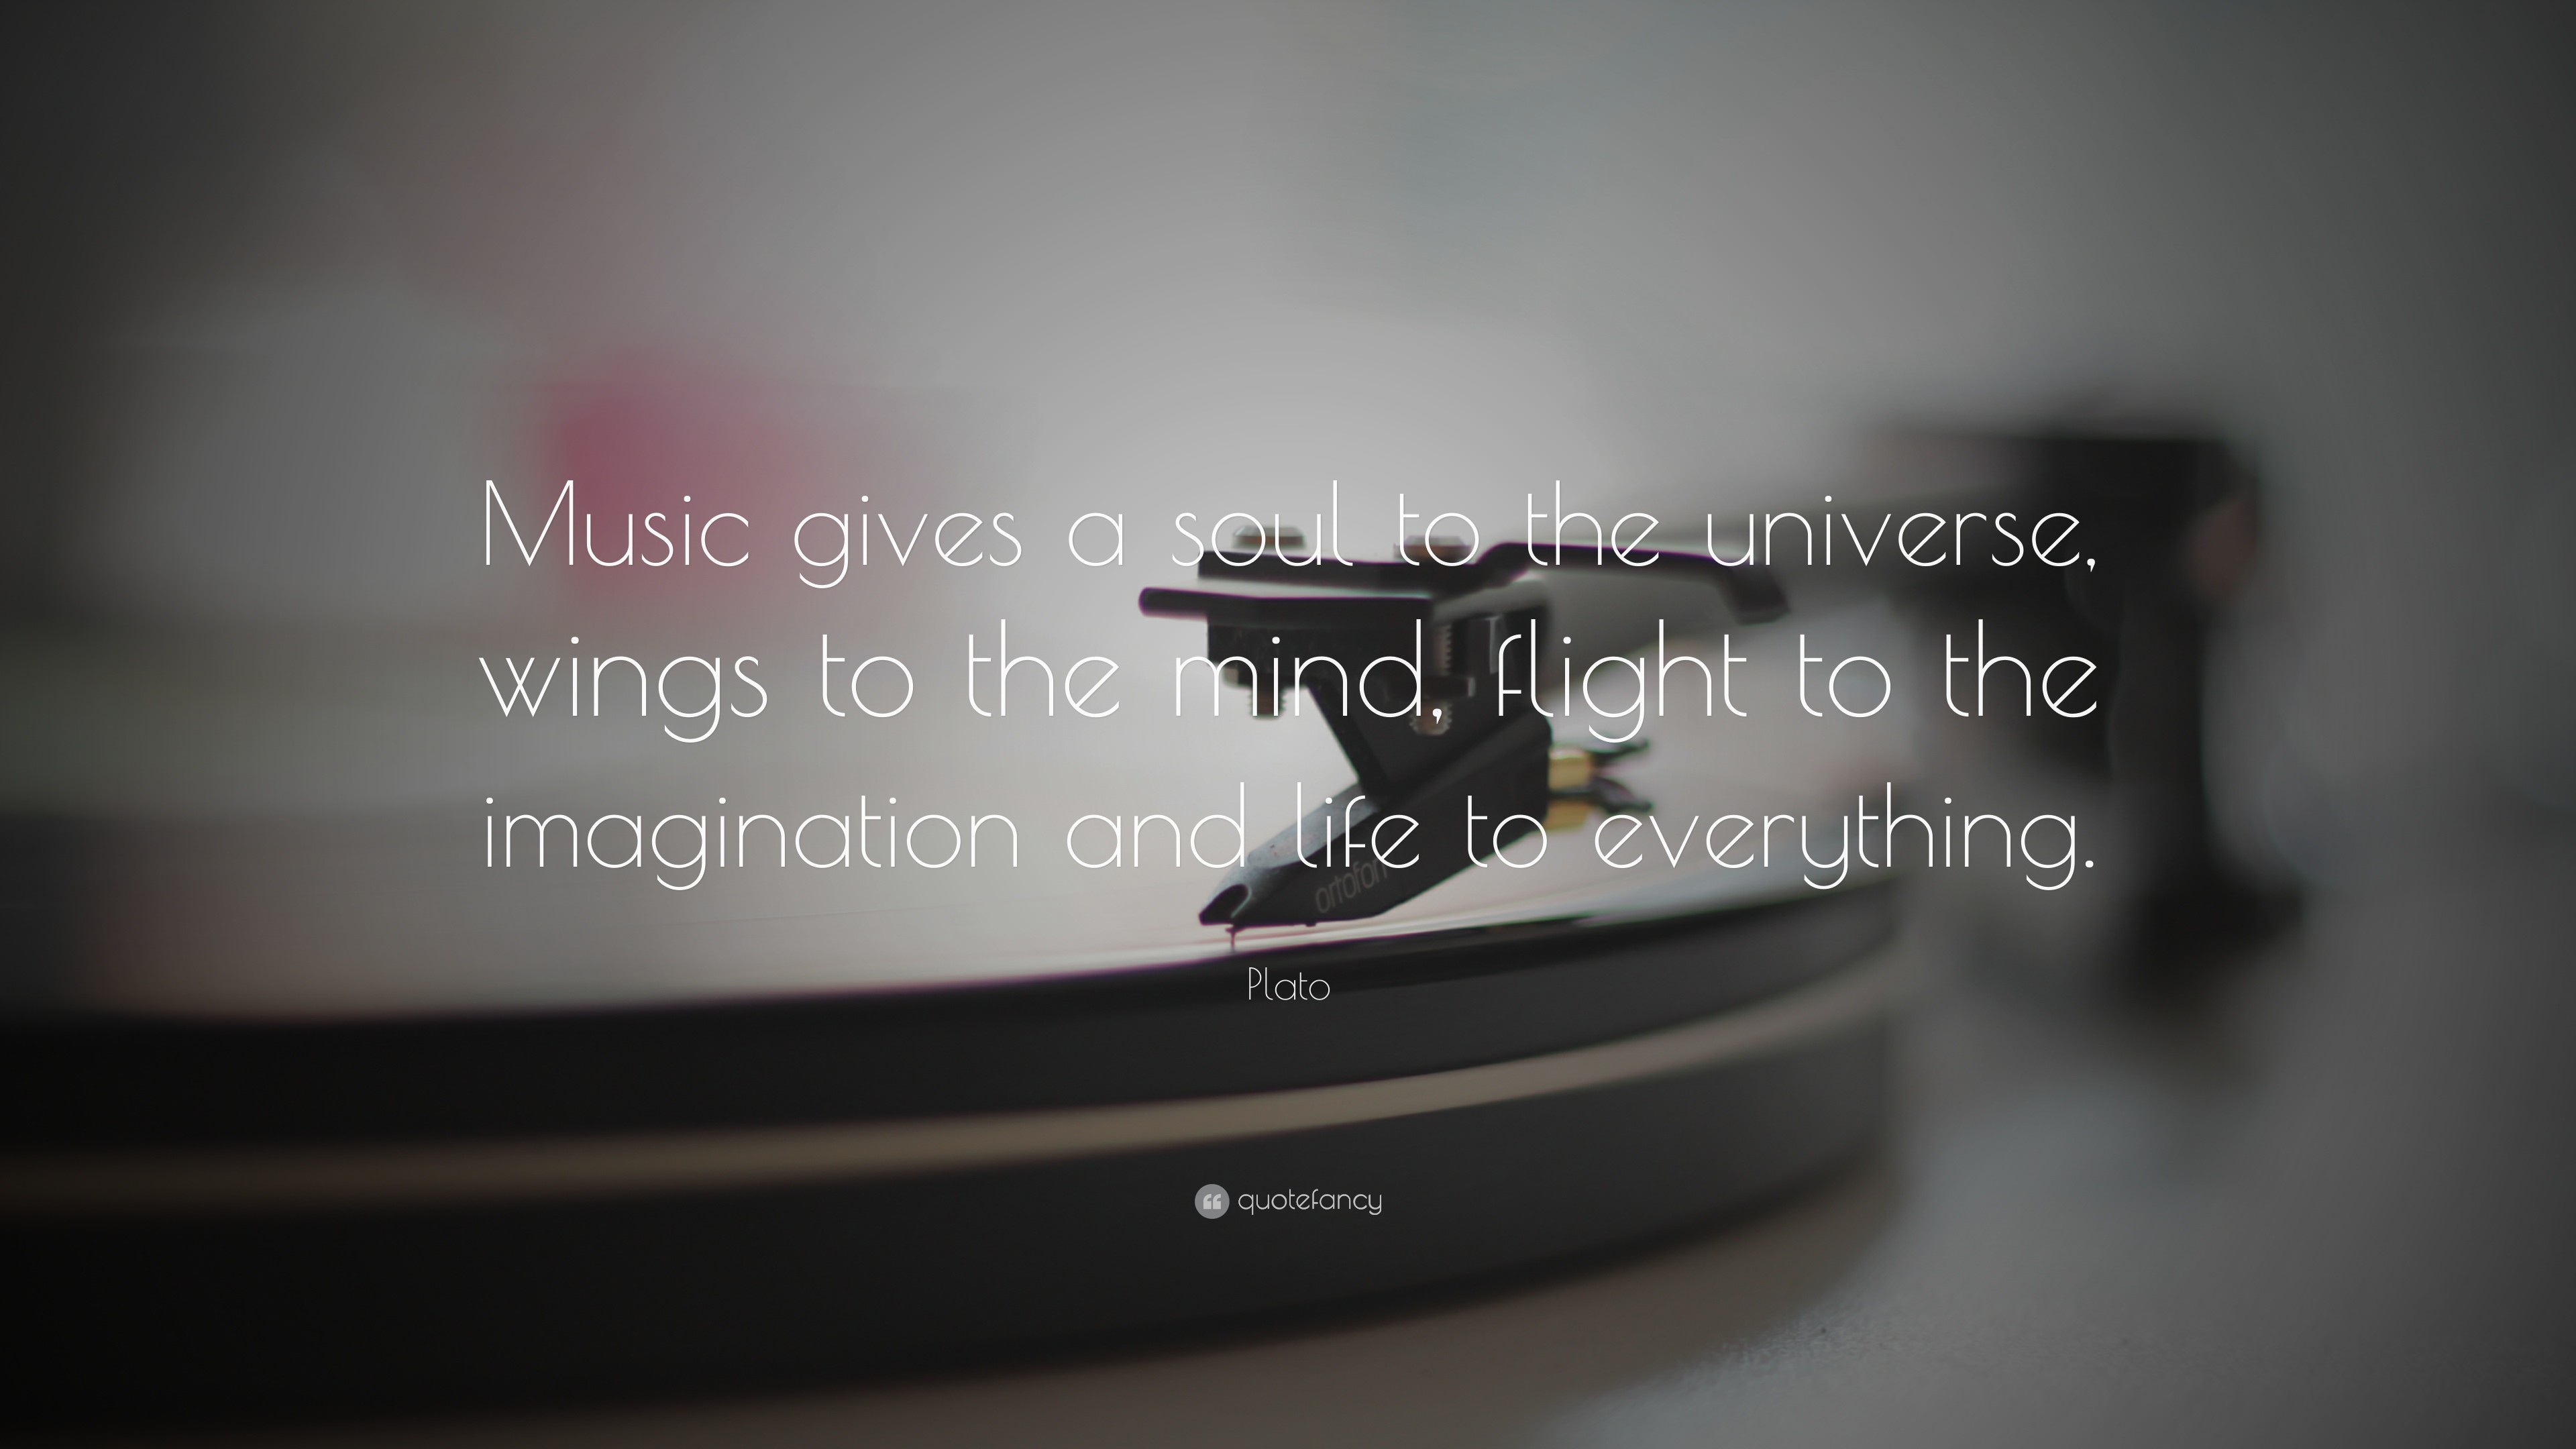 3840x2160 Music Quotes: “Music gives a soul to the universe, wings to the mind